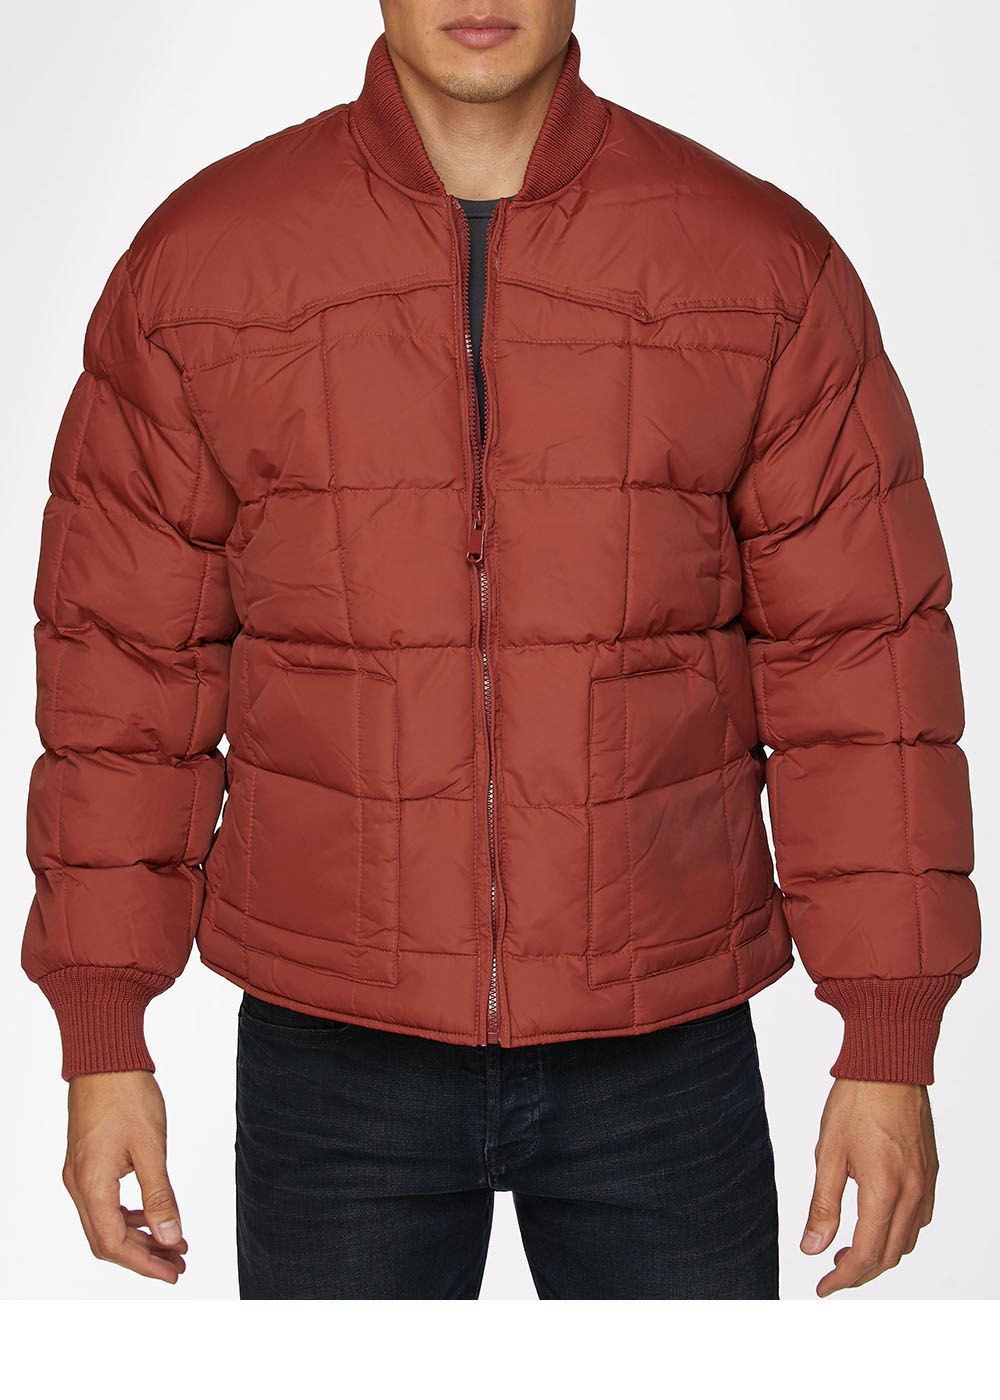 RODEO CLOTHING Men's Western Quilted Nylon Jacket-Rust